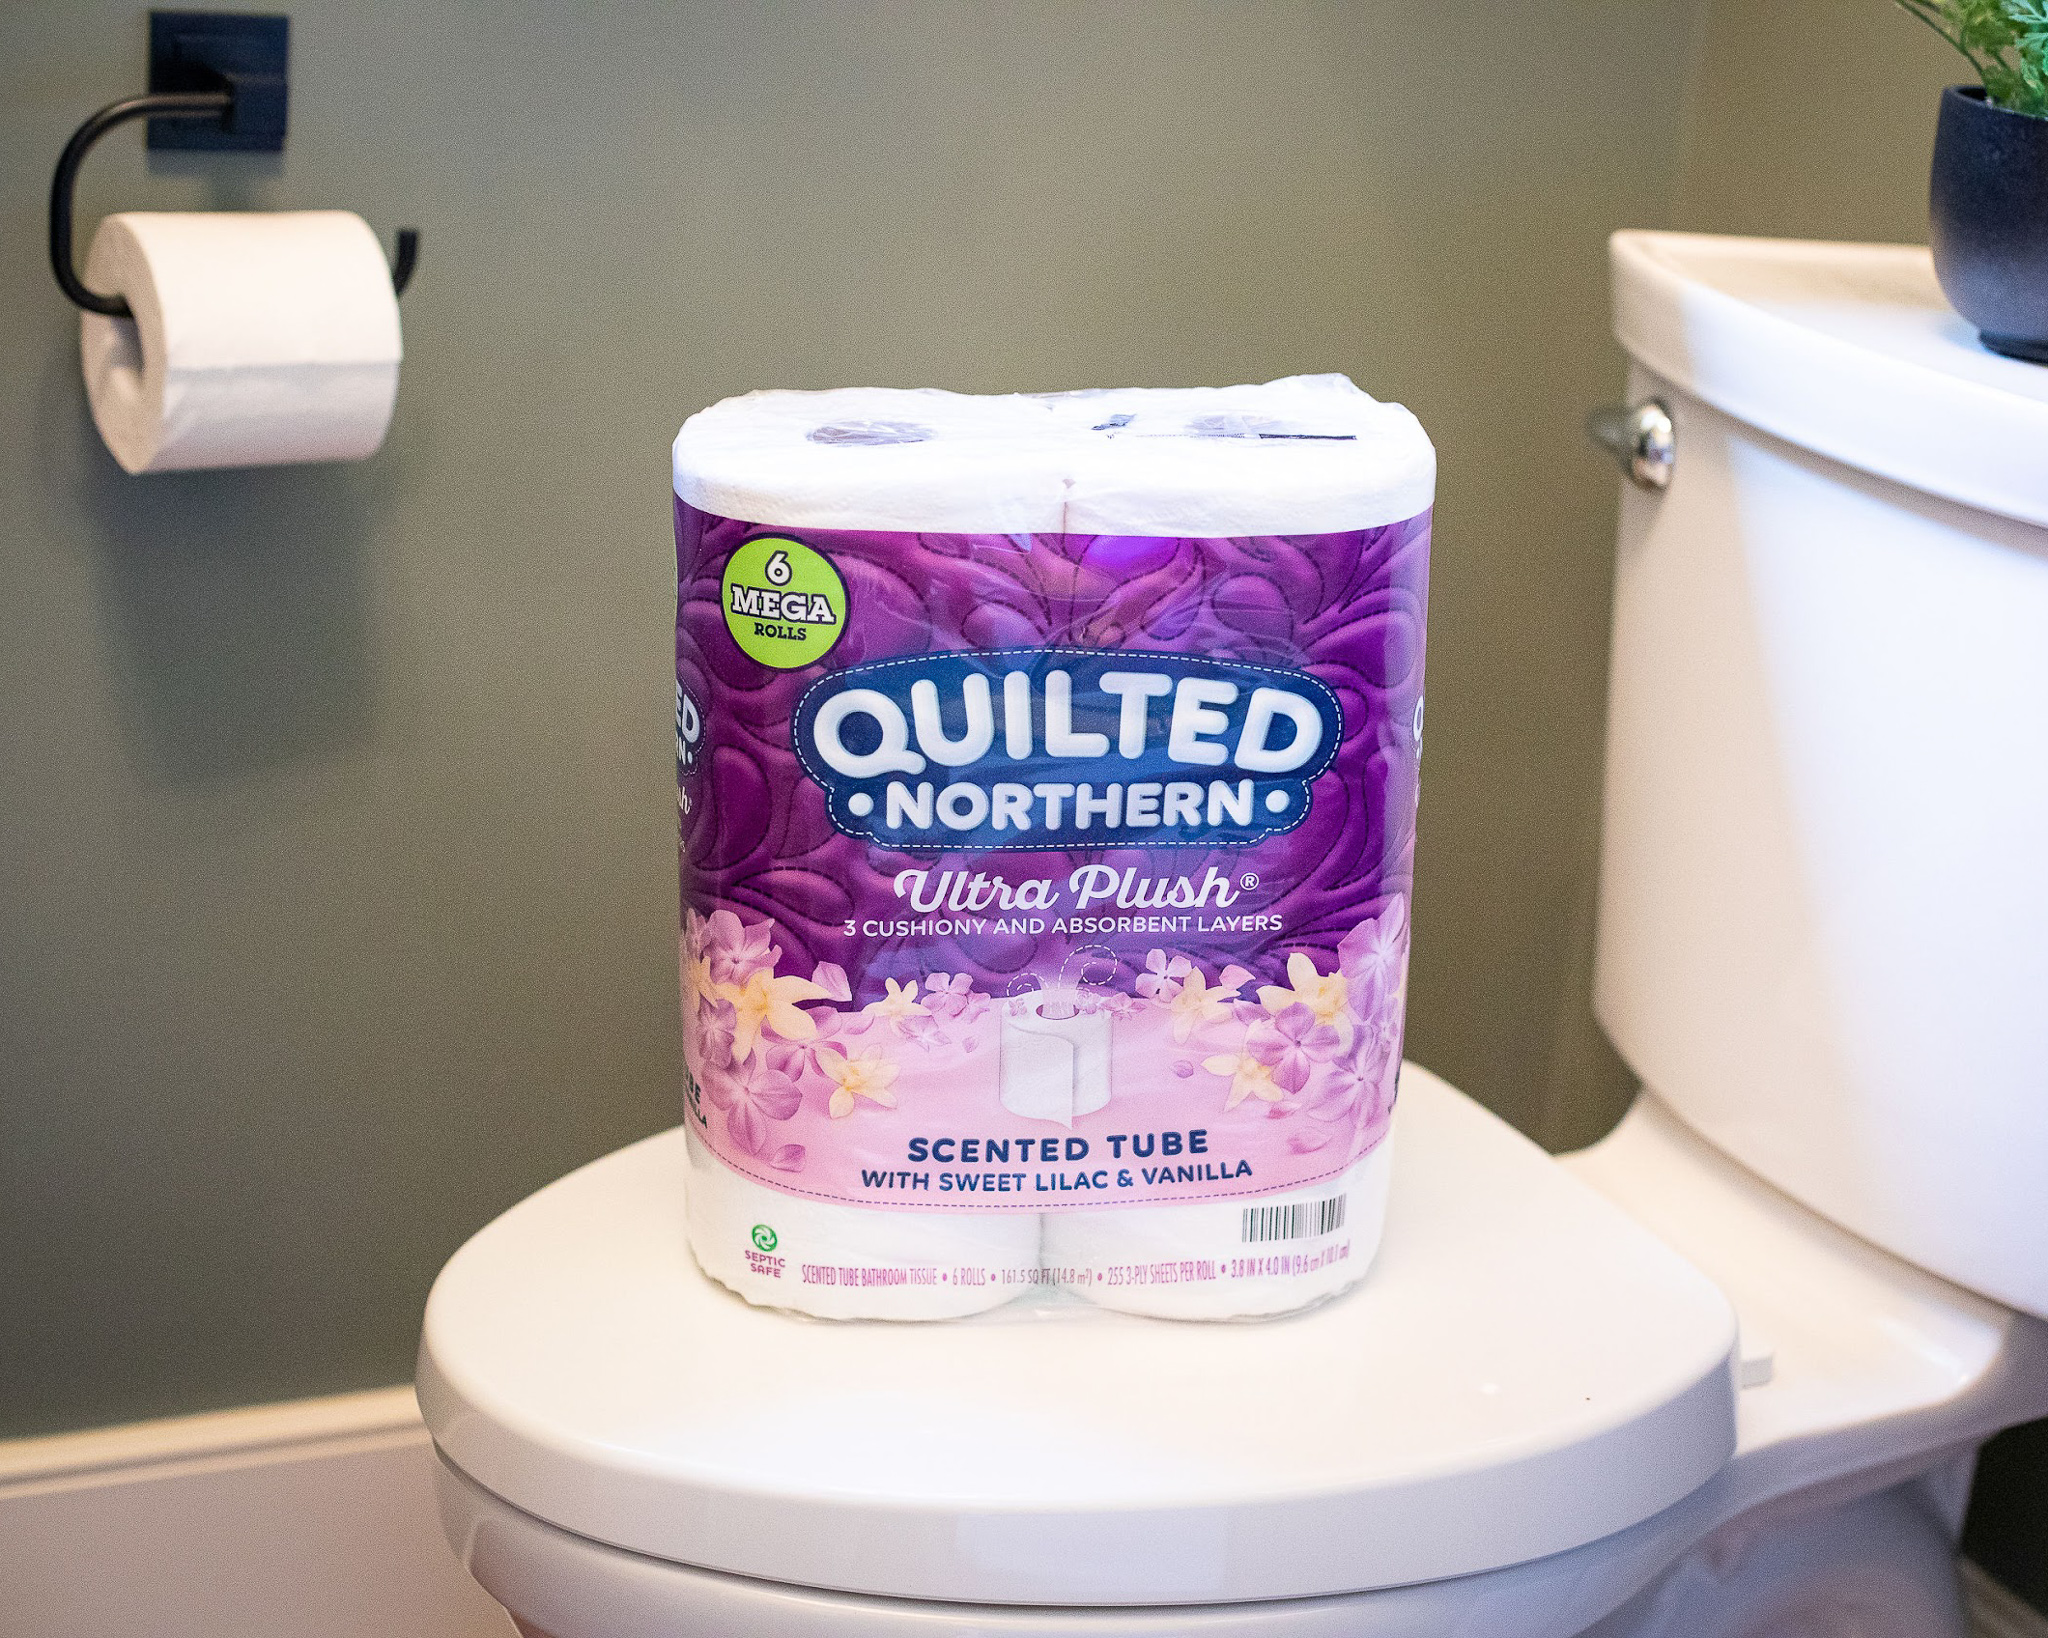 Quilted Northern Bathroom Tissue Just $5 At Publix (Regular Price $9.99)